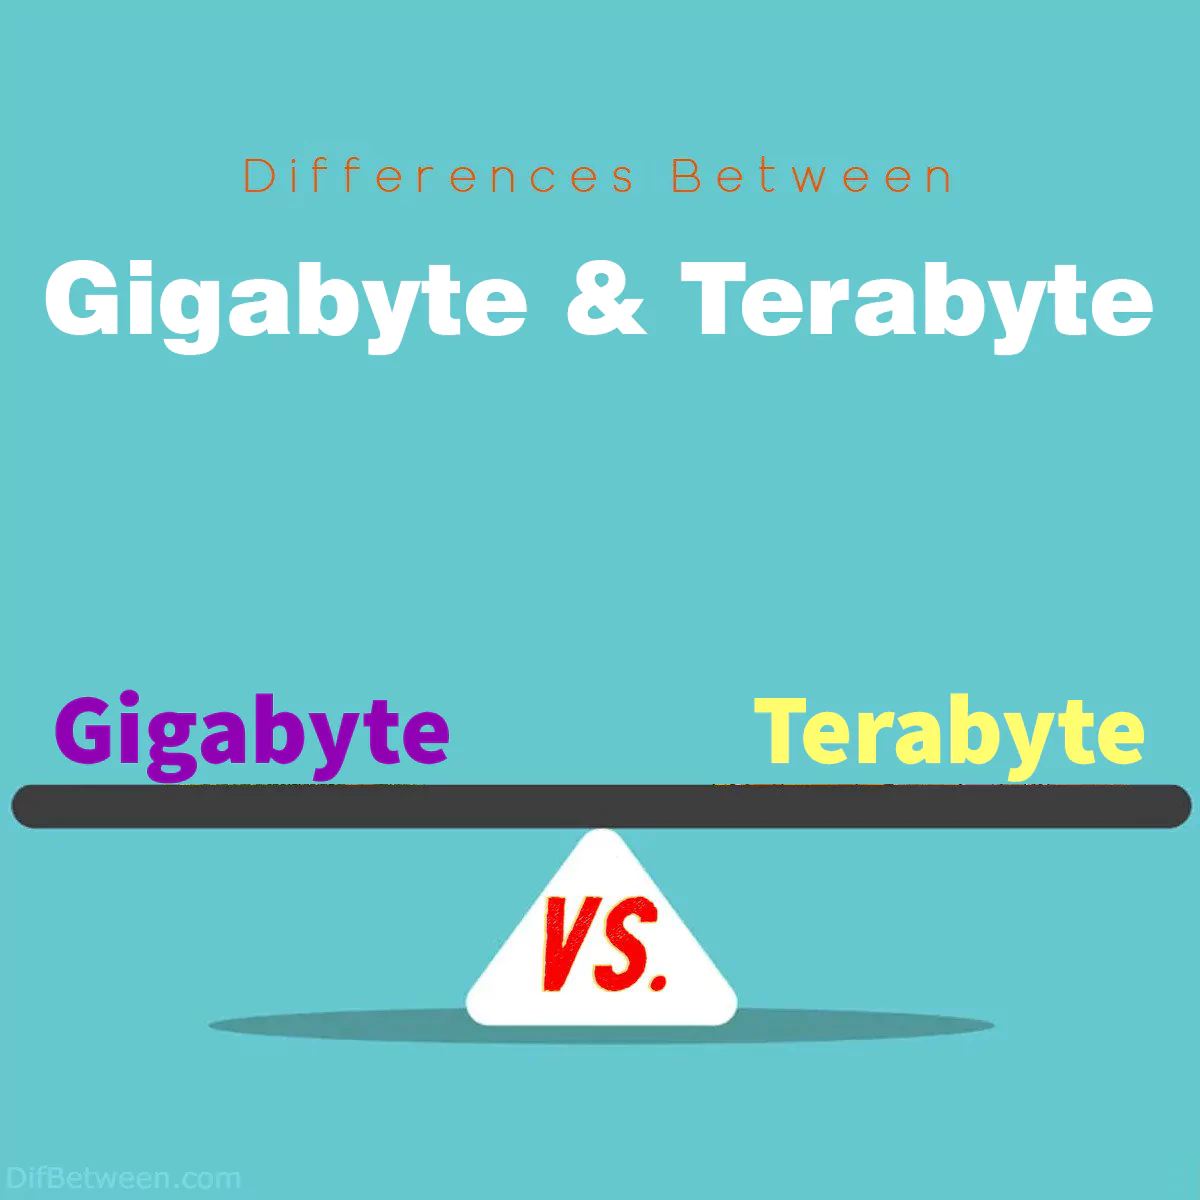 Differences Between Gigabyte and Terabyte